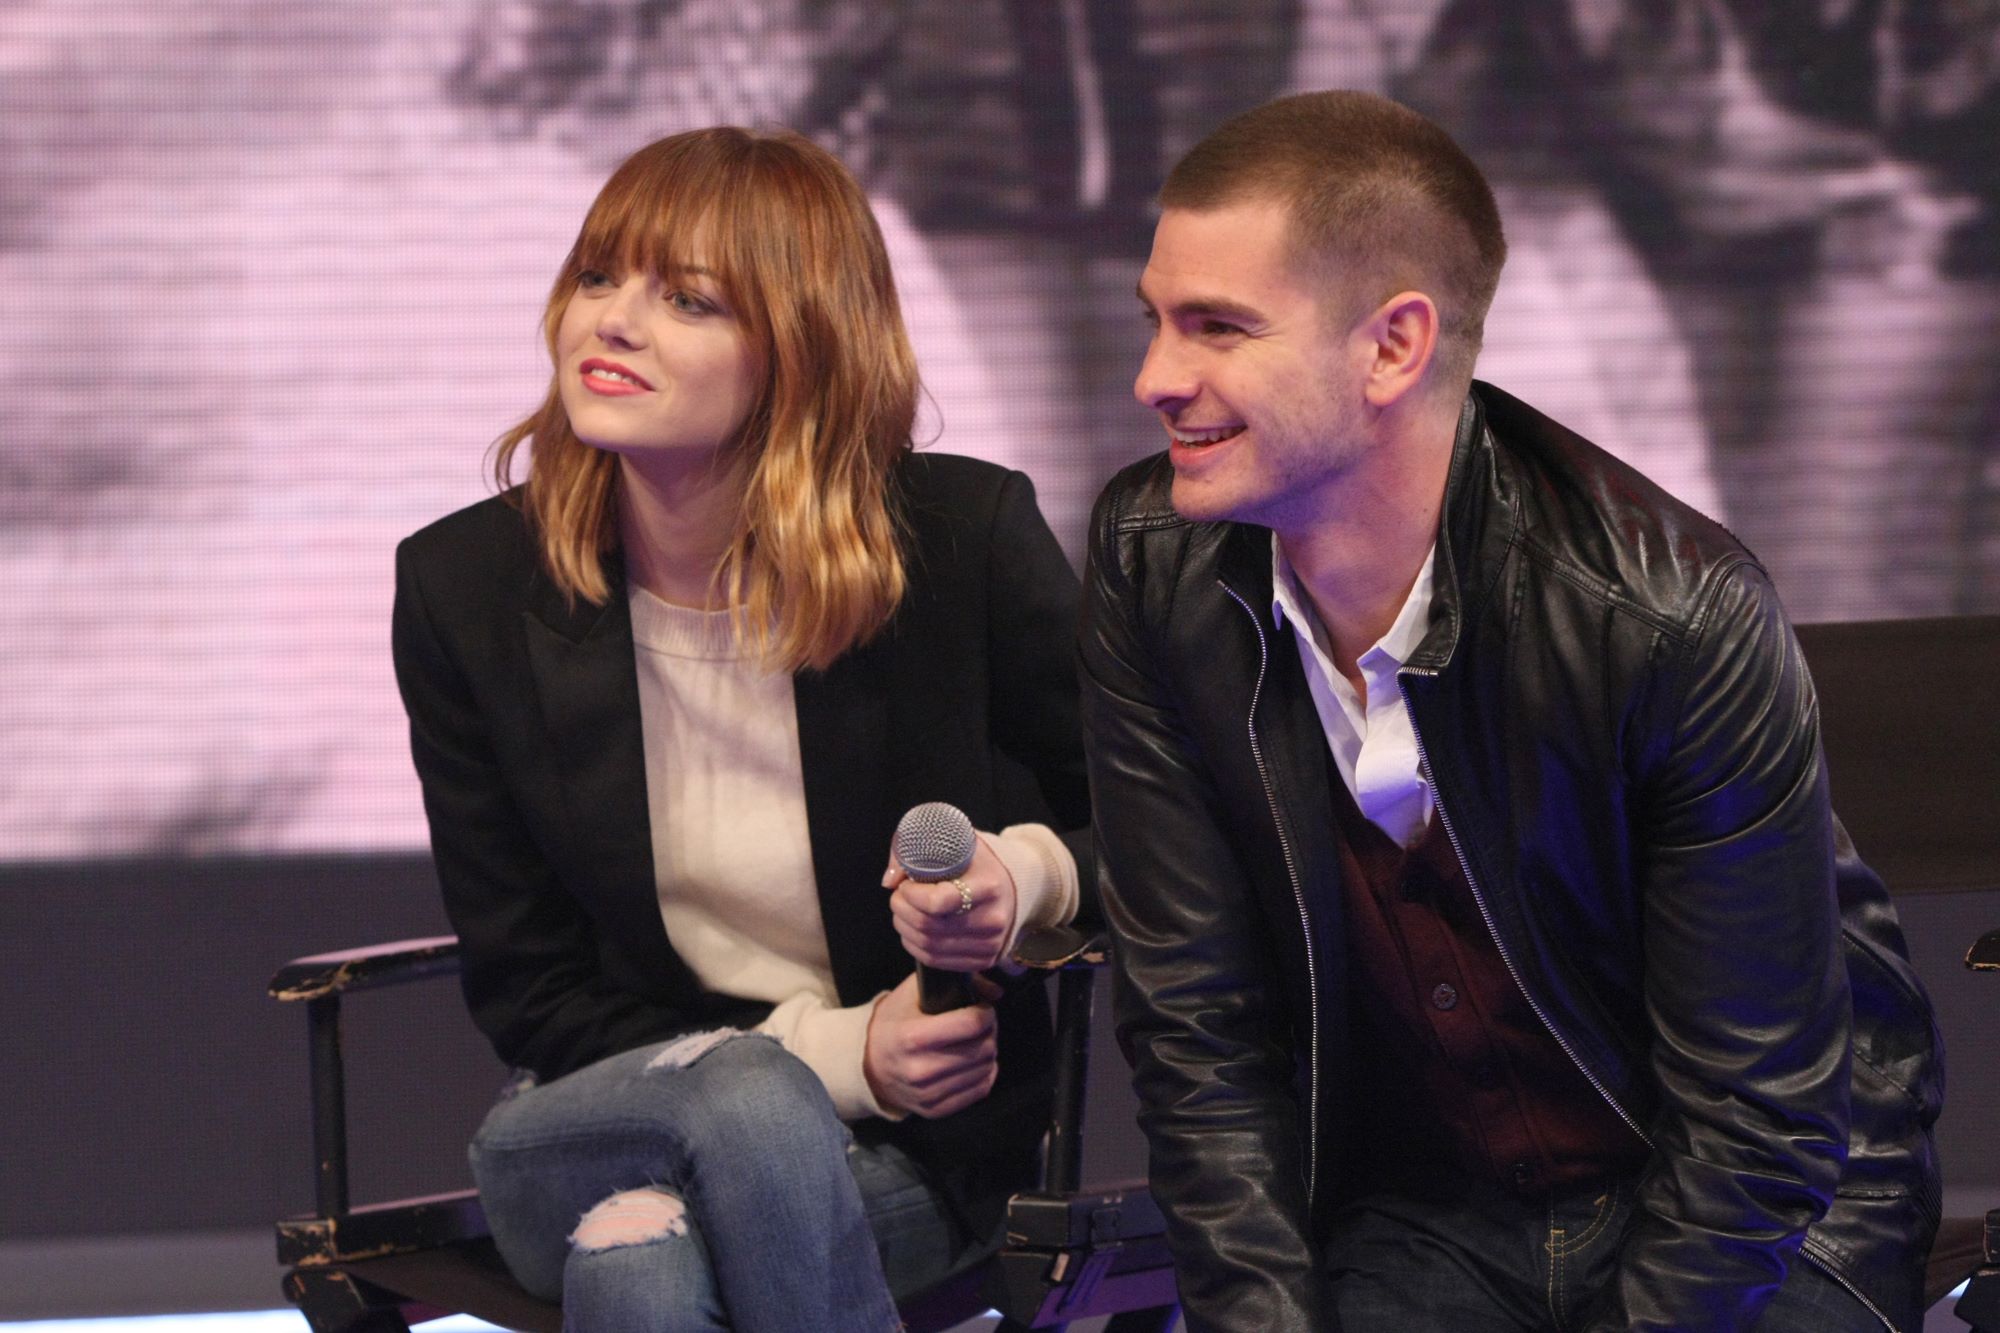 'Spider-Man: No Way Home' actor Andrew Garfield and actor Emma Stone speak onstage during a panel. Garfield wears a black leather jacket and jeans. Stone wears a black jacket over a tan sweater and jeans.